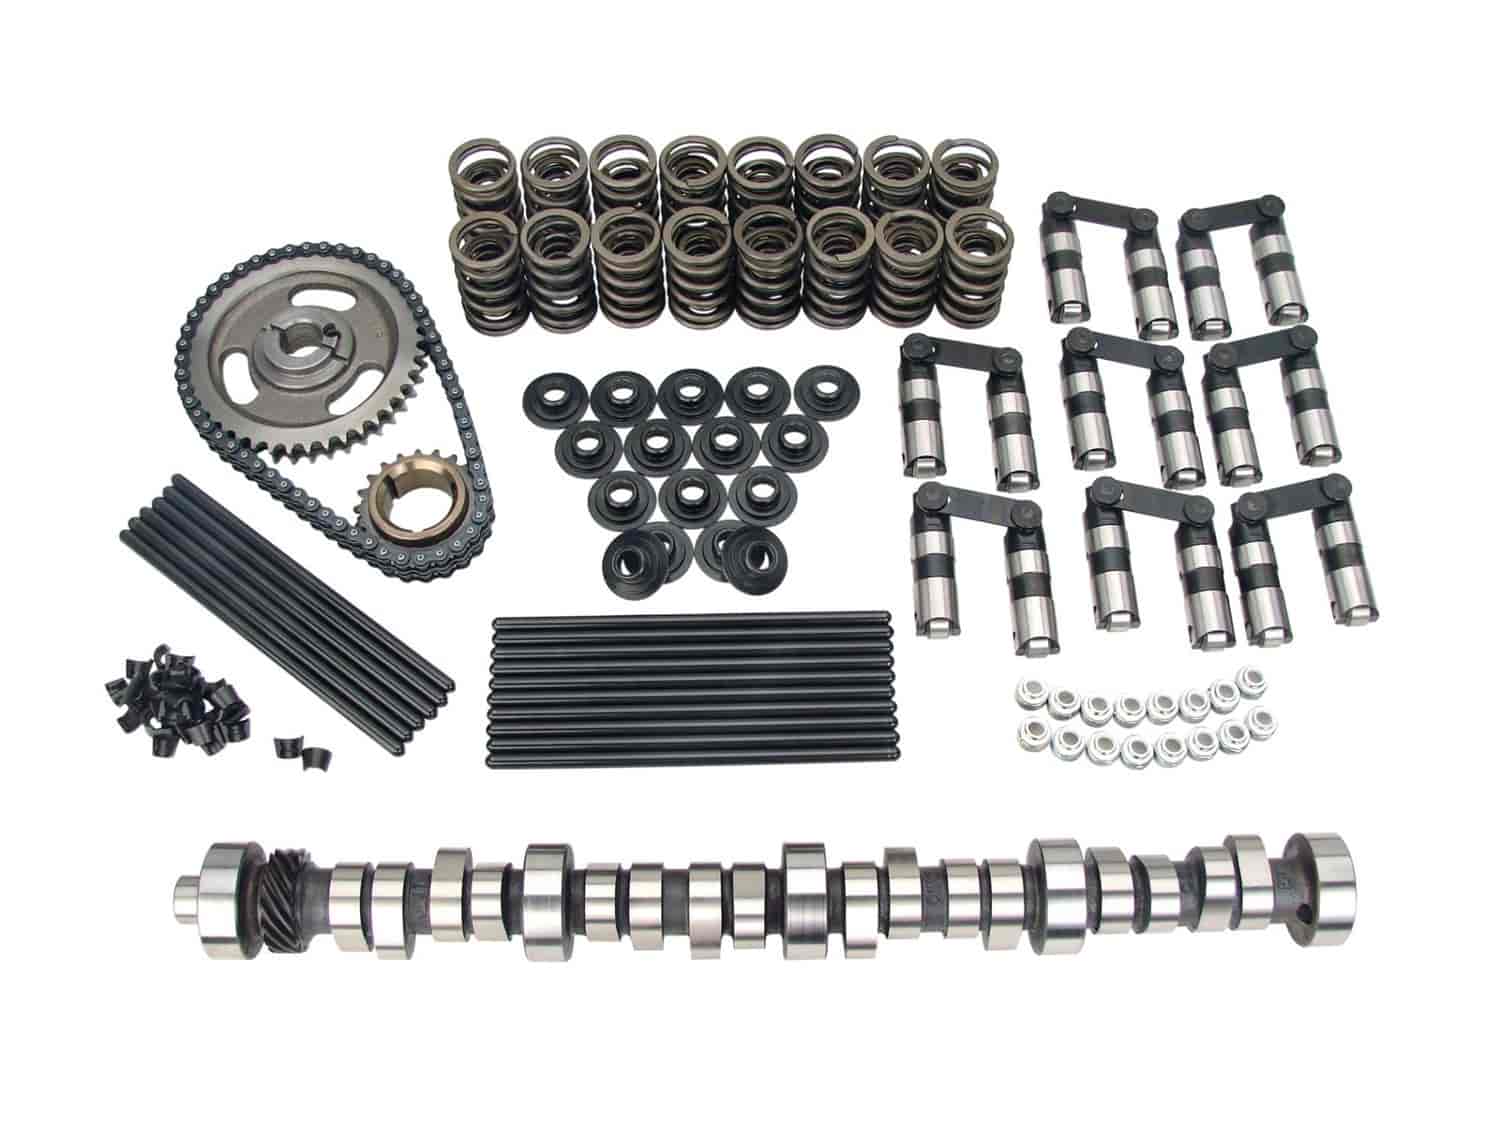 Thumpr Retro-Fit Hydraulic Roller Camshaft Complete Kit Lift: